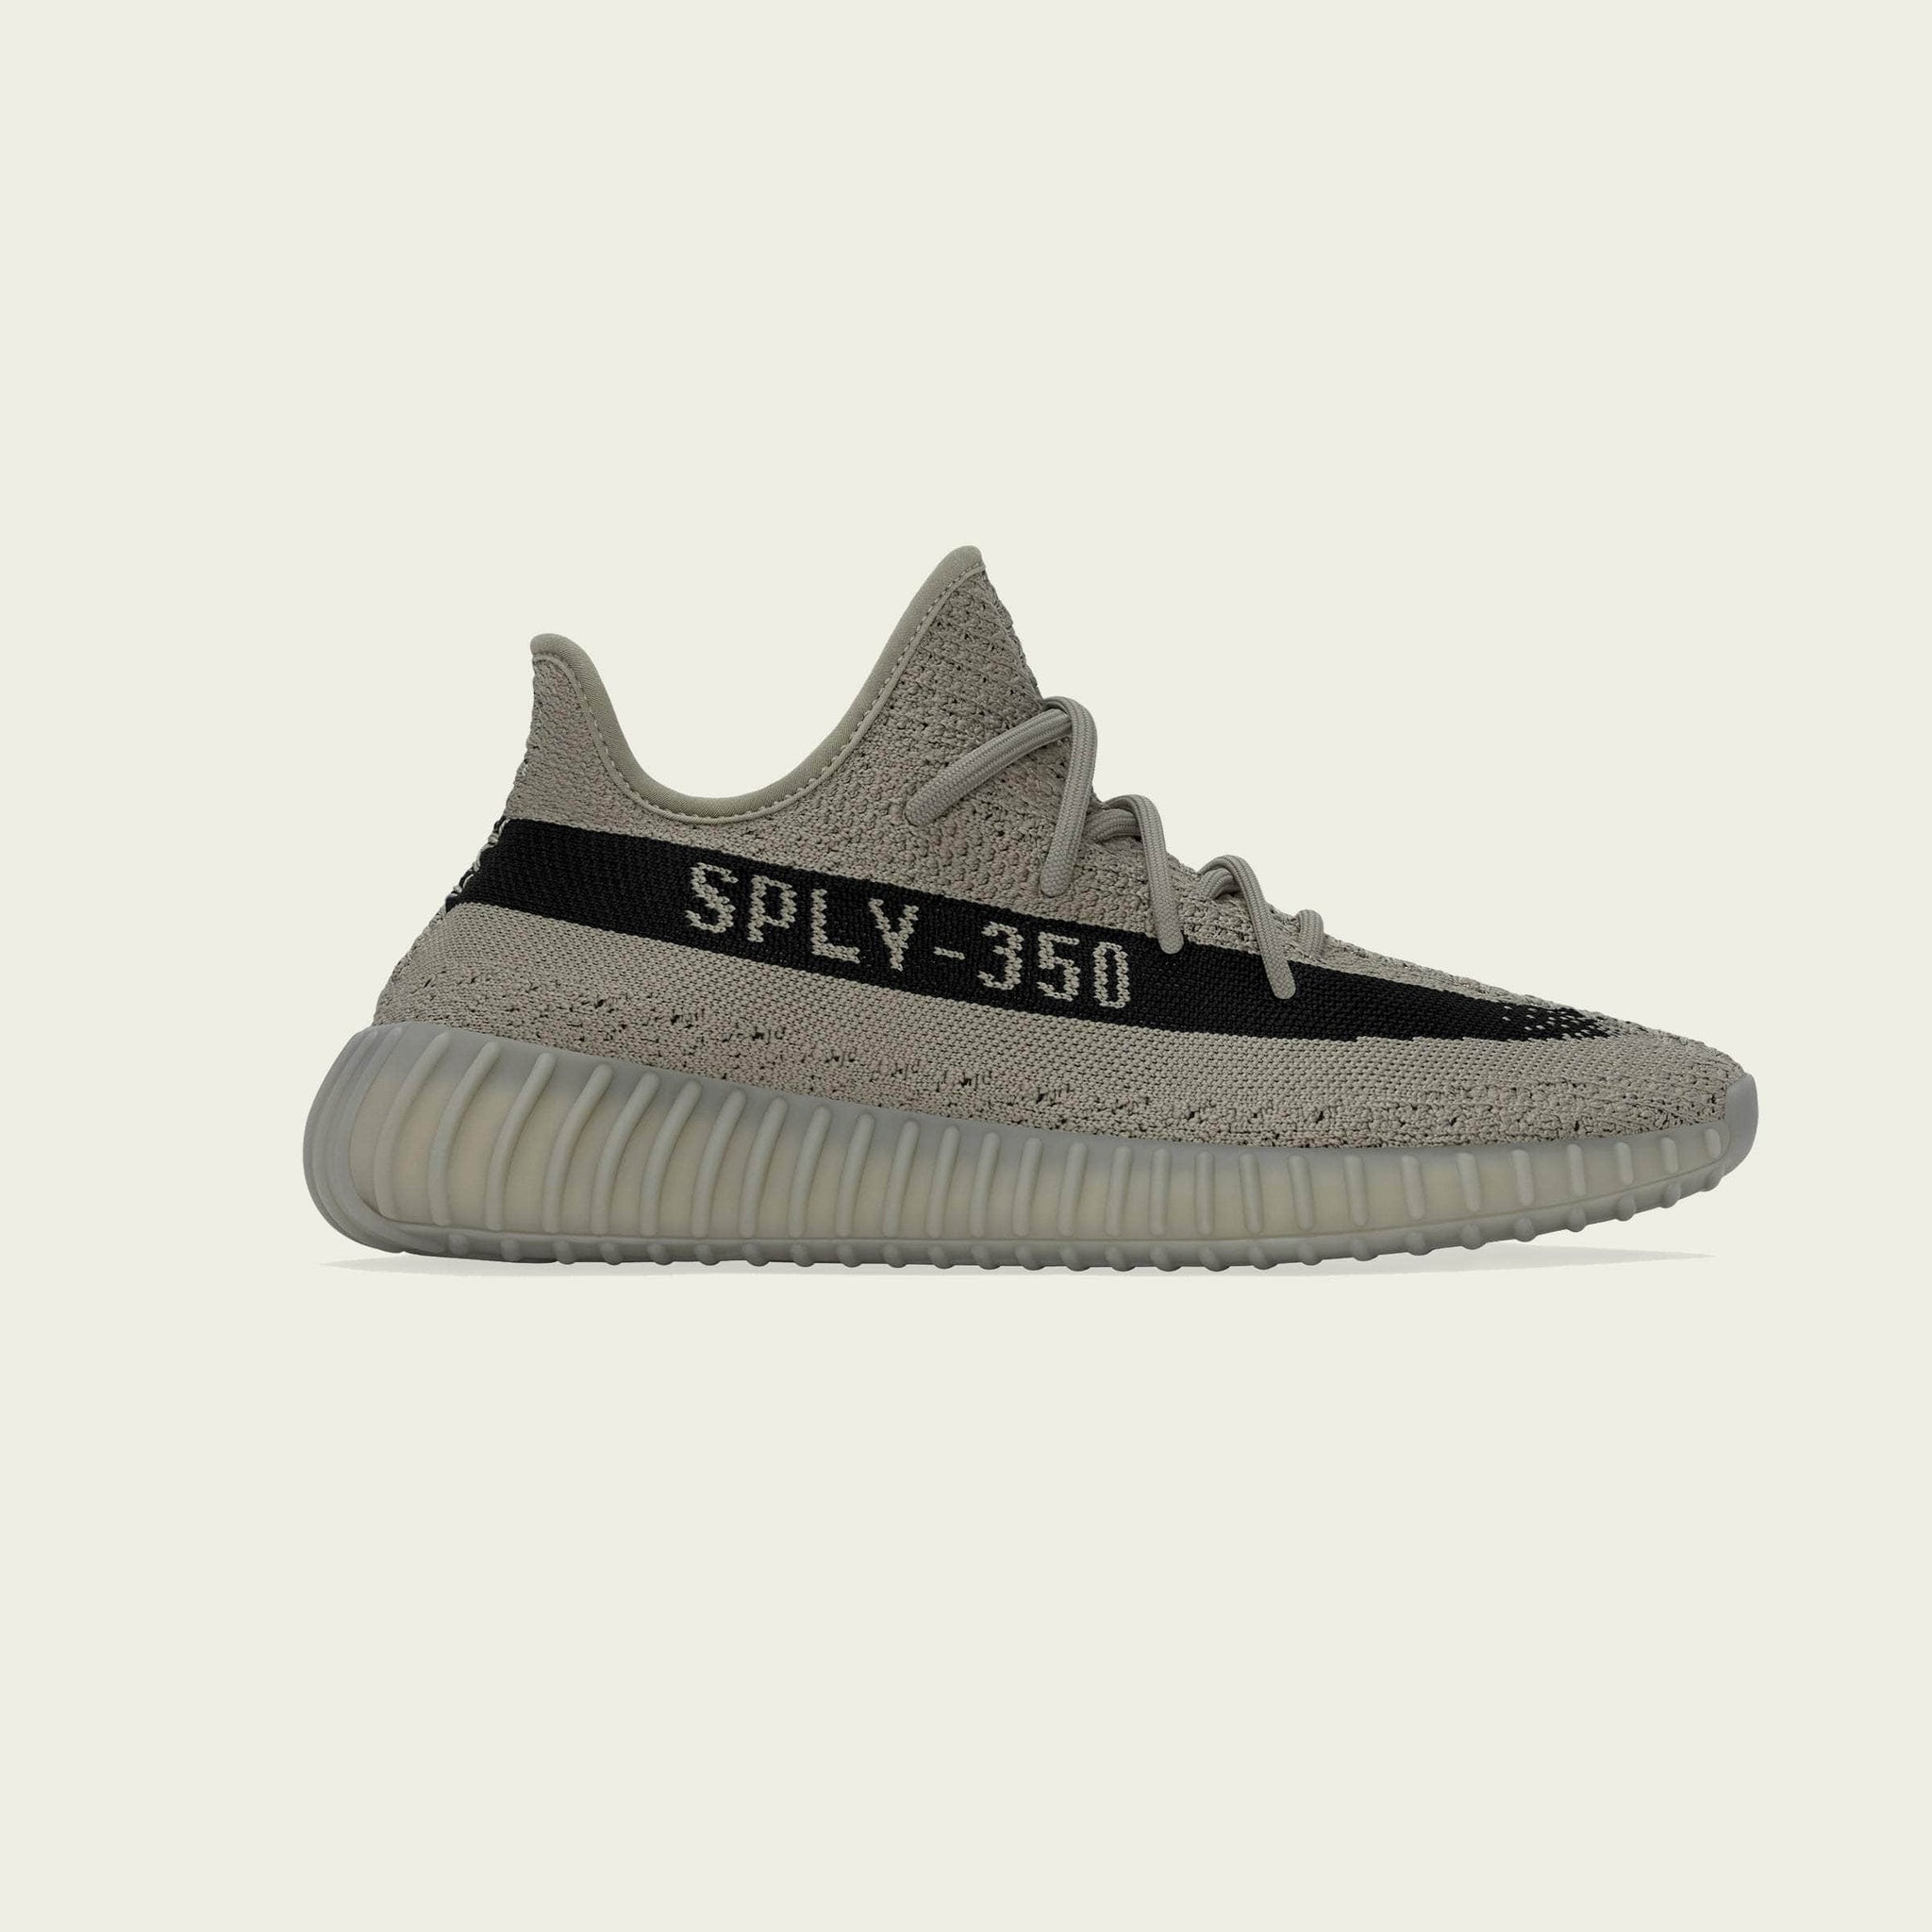 Adidas Men's Yeezy Boost 350 V2 Shoes